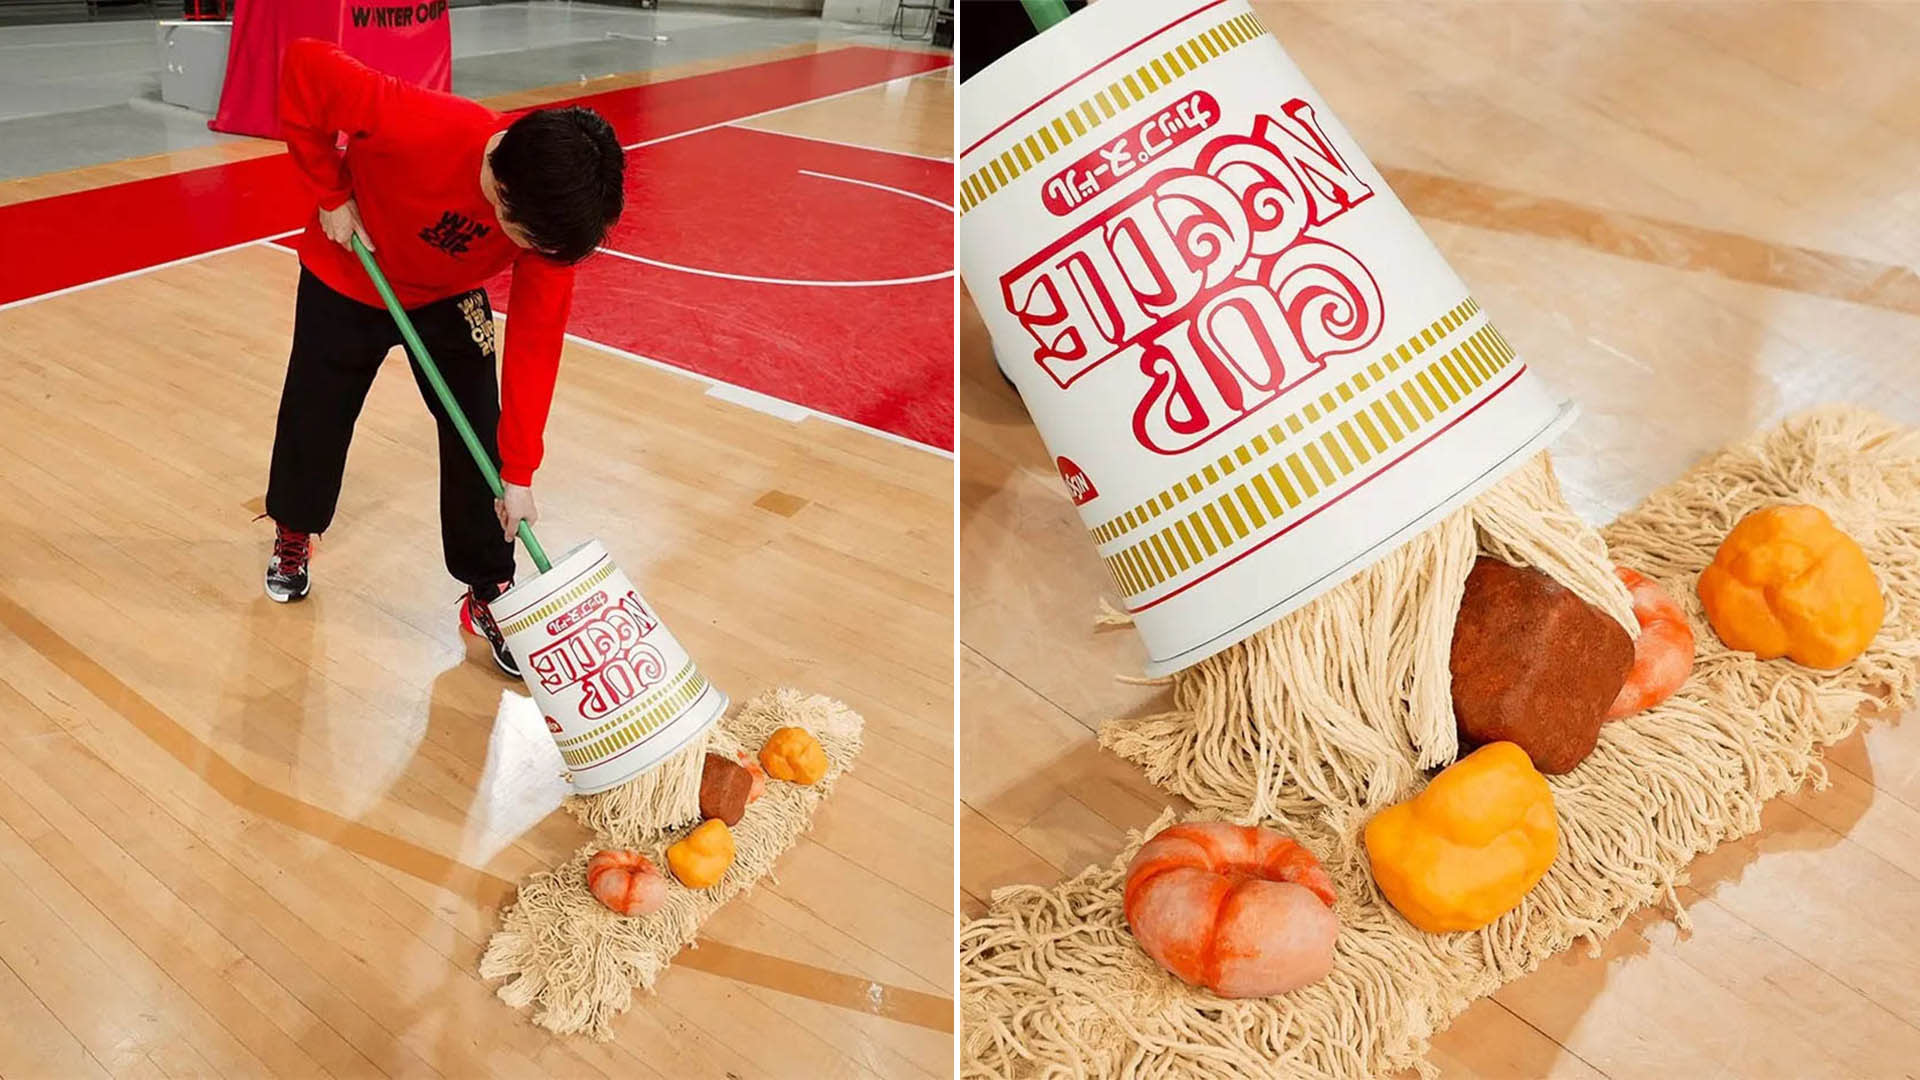 Instant Noodle Mops Exist, But They're Not For Everyone